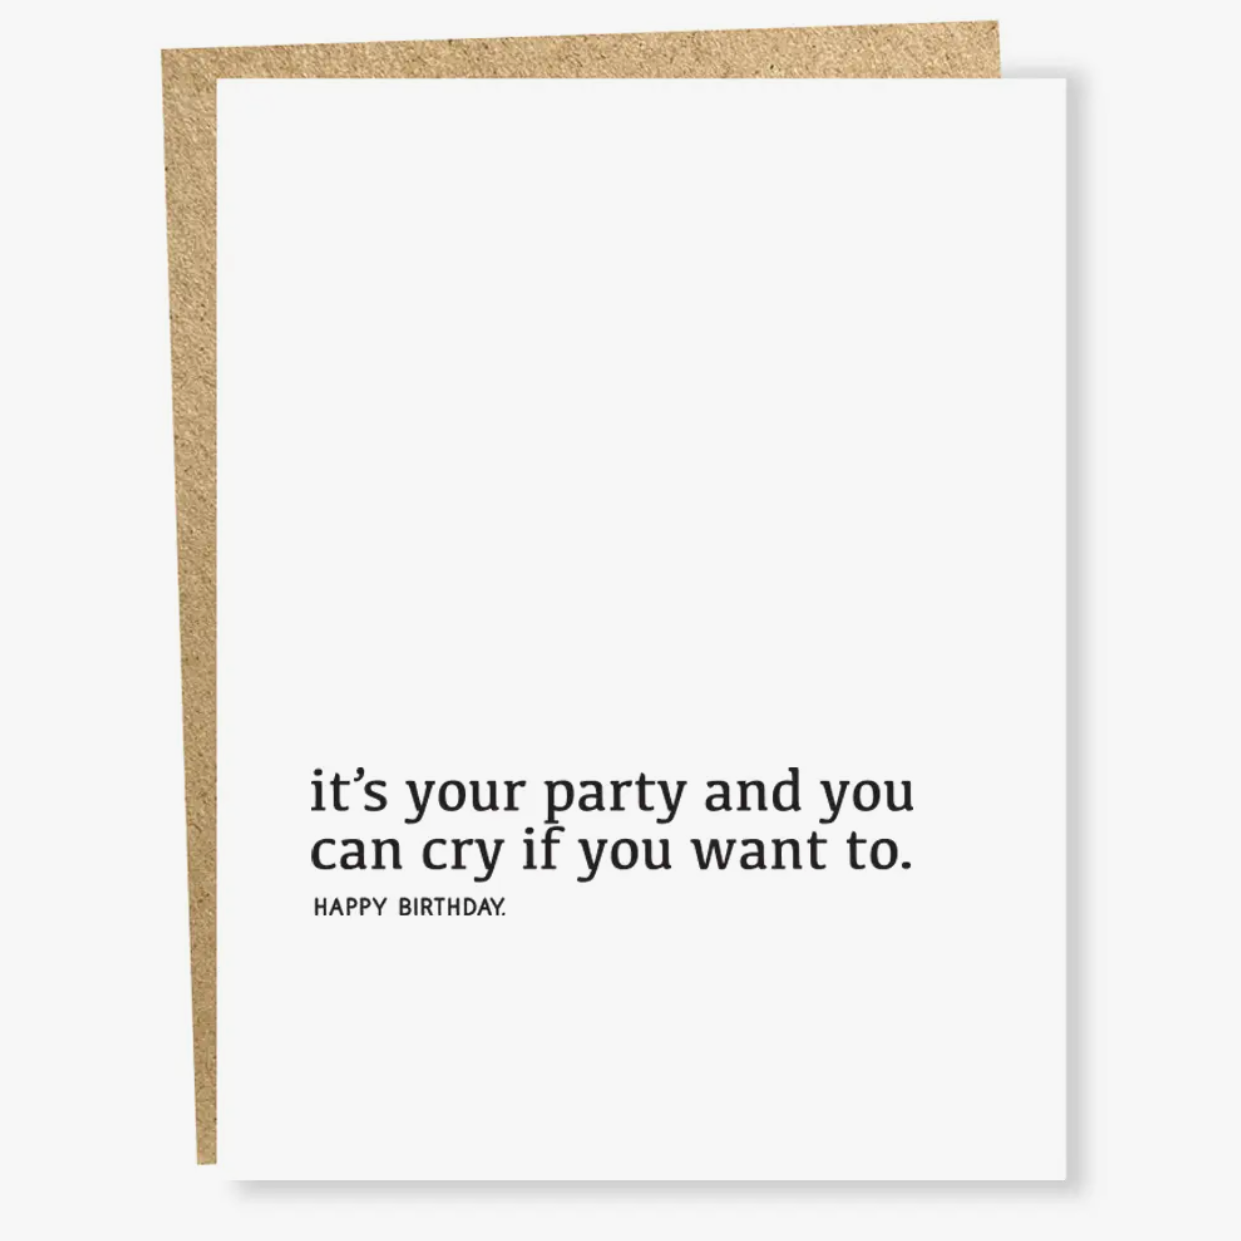 Your Party